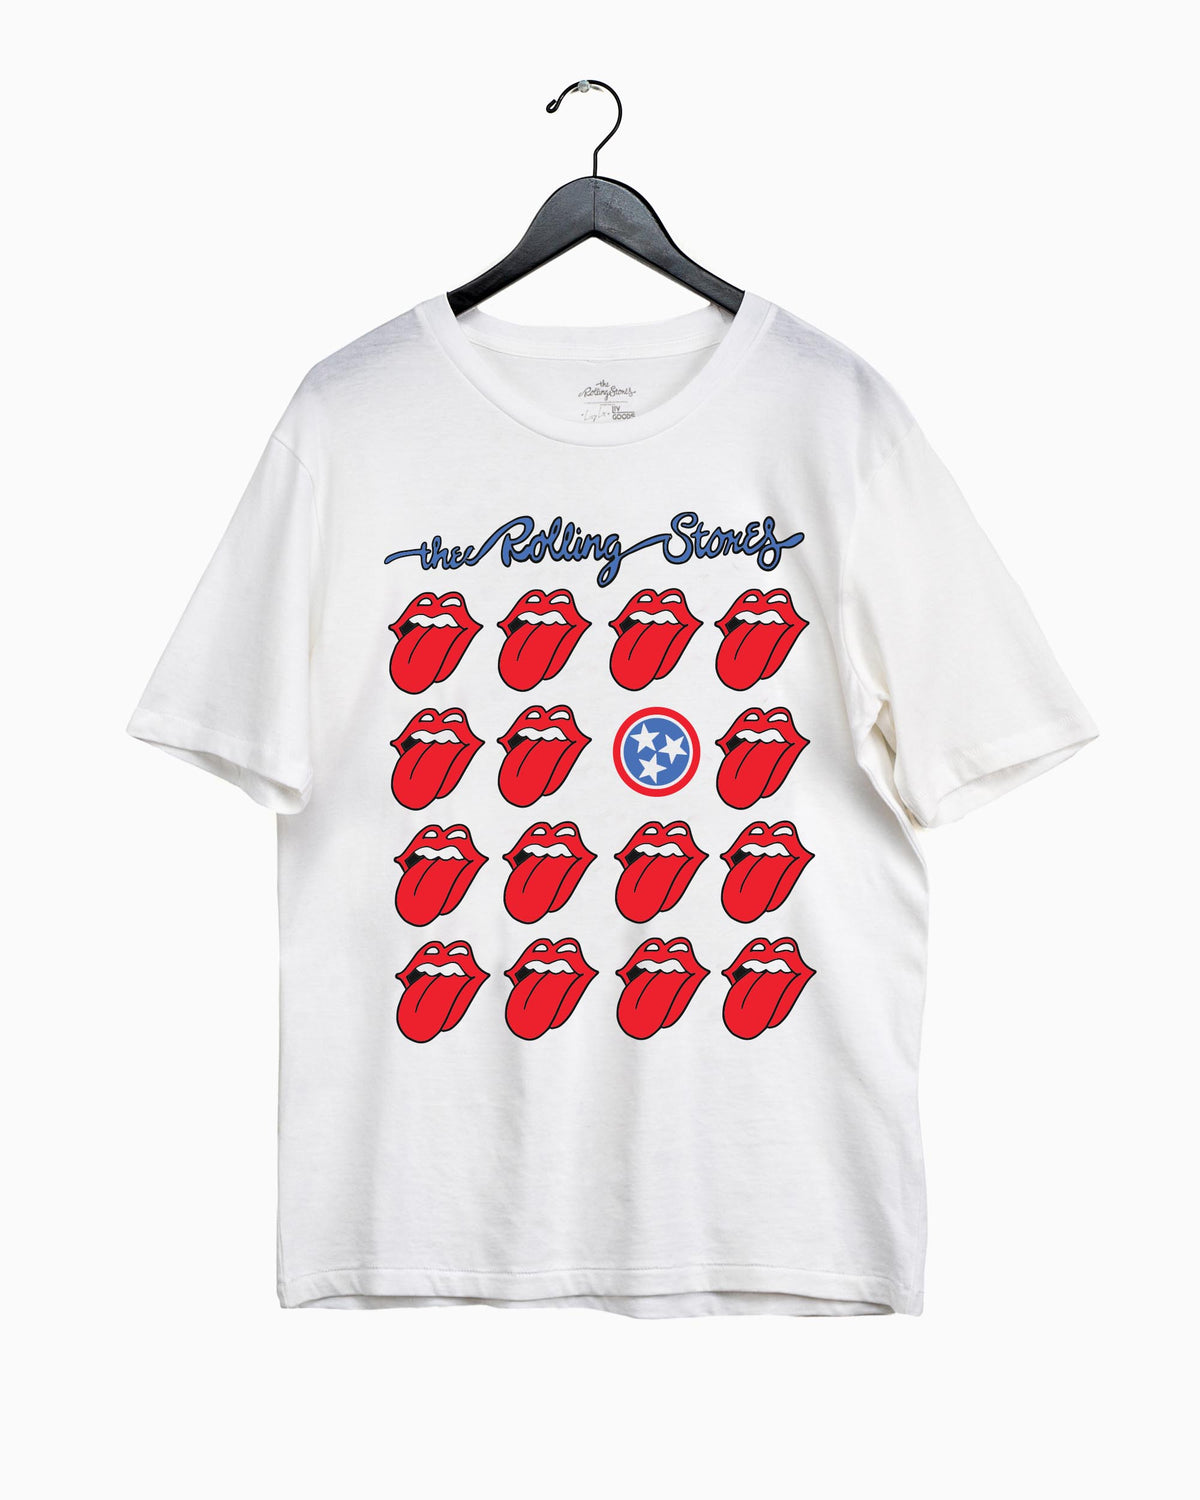 Rolling Stones Tennessee Flag Multi Lick White Tee (4519059882087)